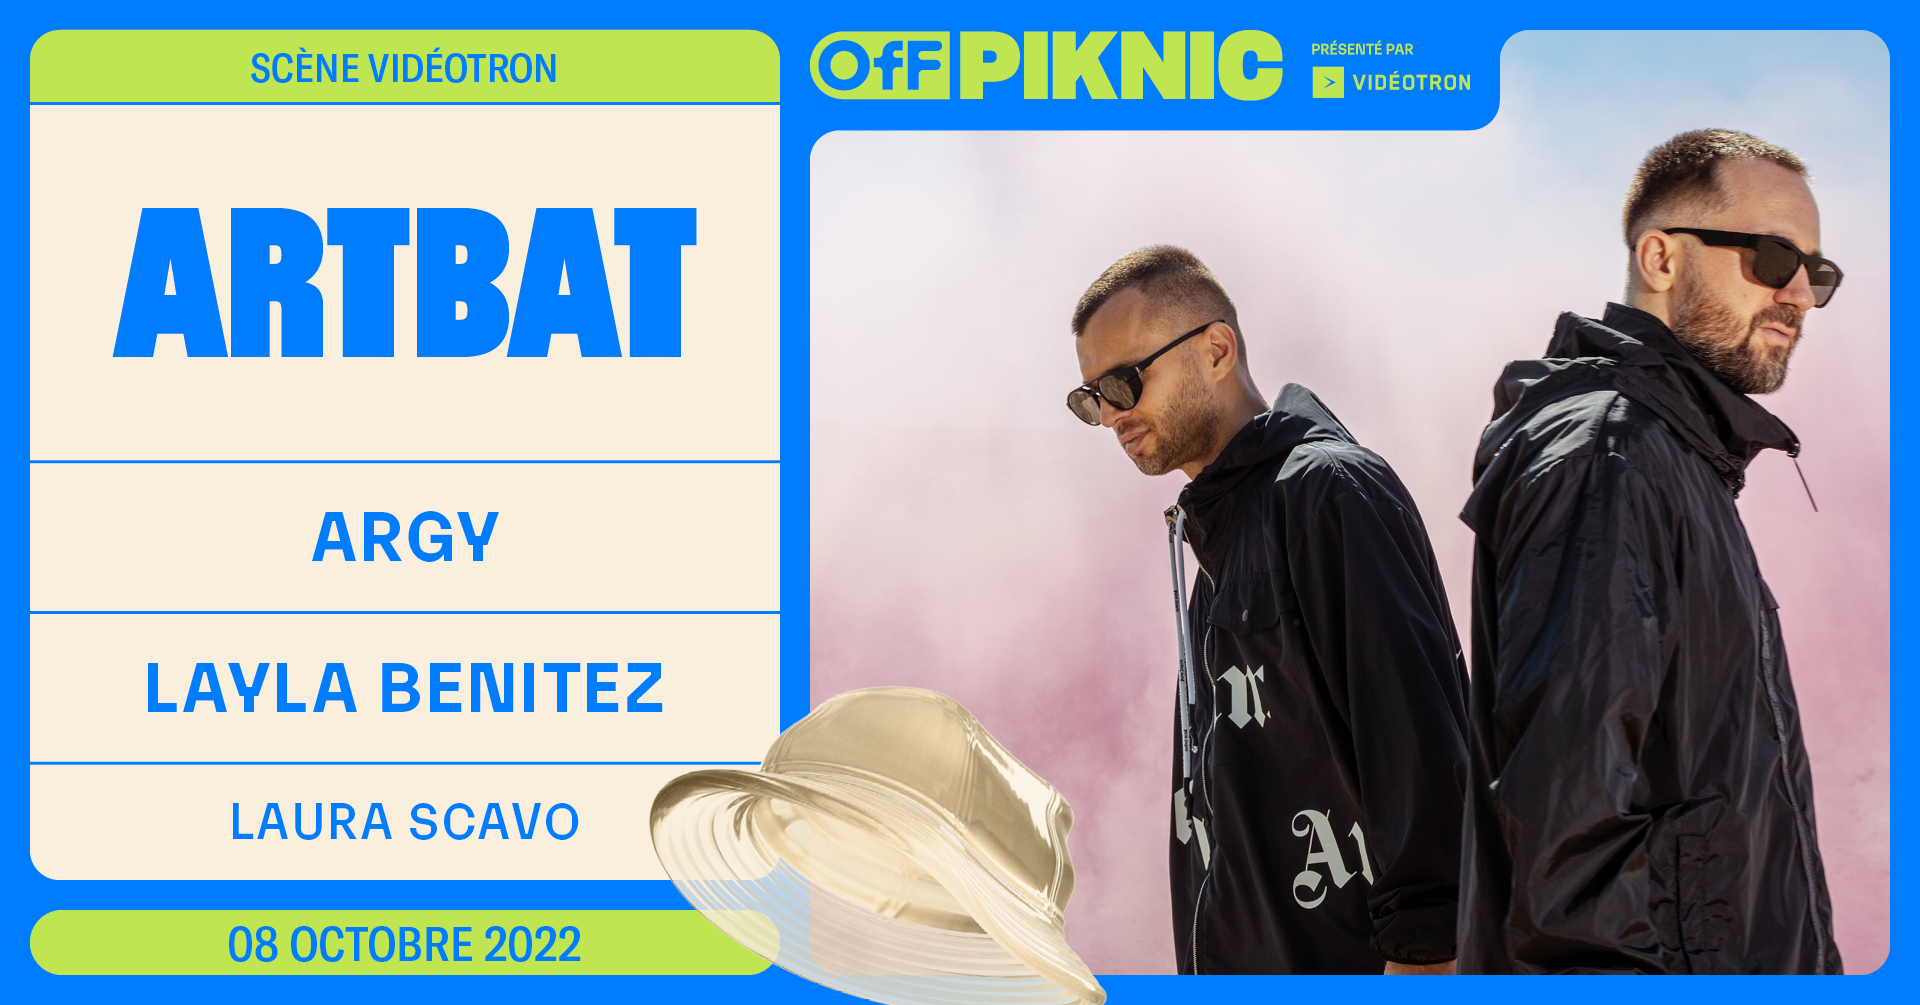 ARTBAT for the first time in Montreal! | Piknic Électronik